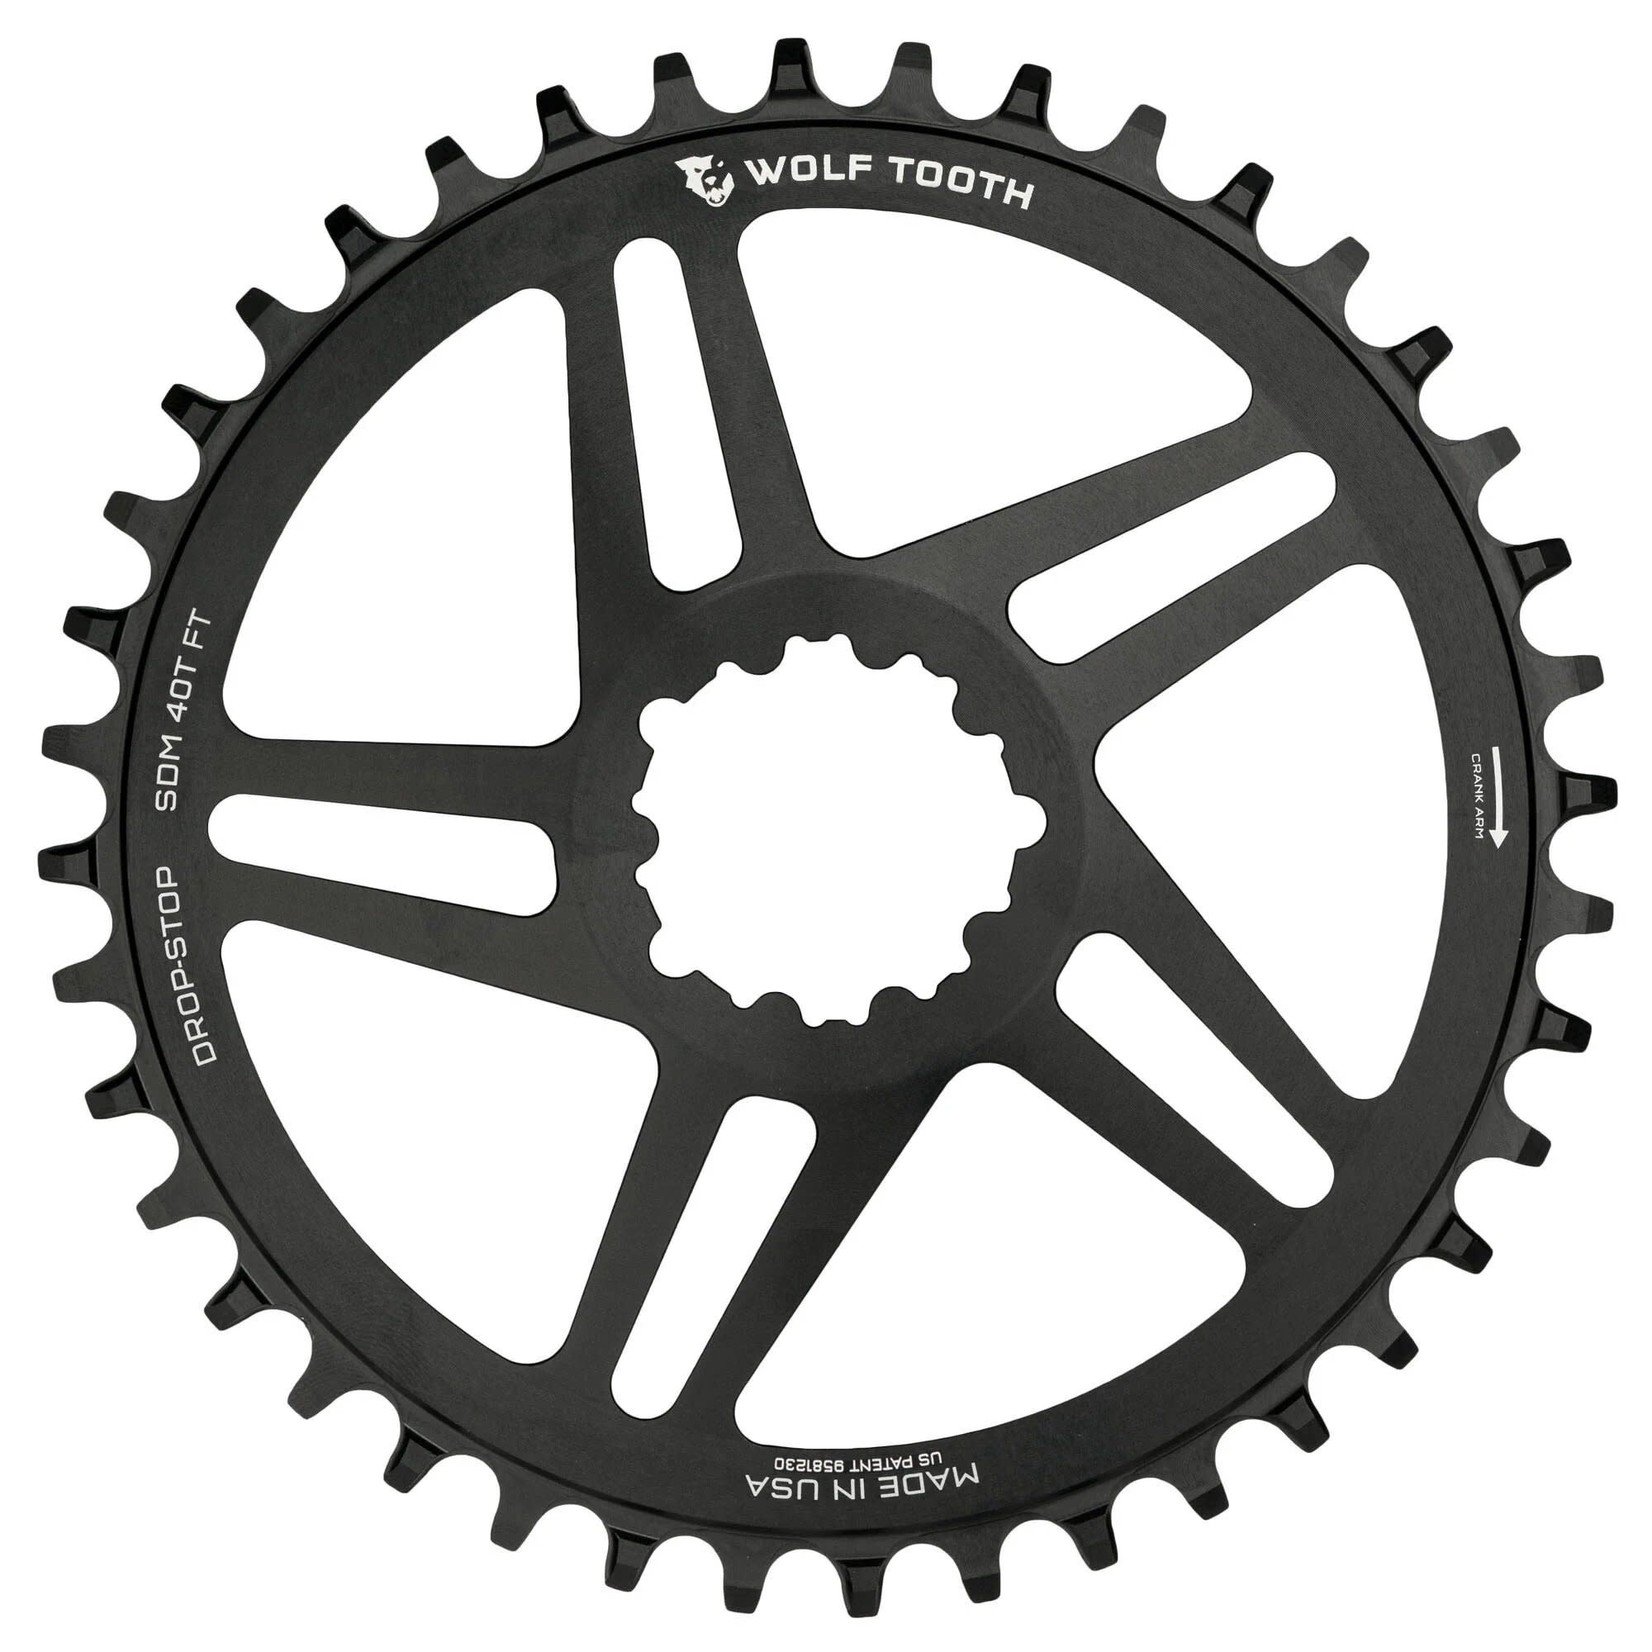 Wolf Tooth Components Wolf Tooth Direct Mount SRAM Drop-Stop Chainring - Black - 26T - 49mm Chainline/6mm Offset